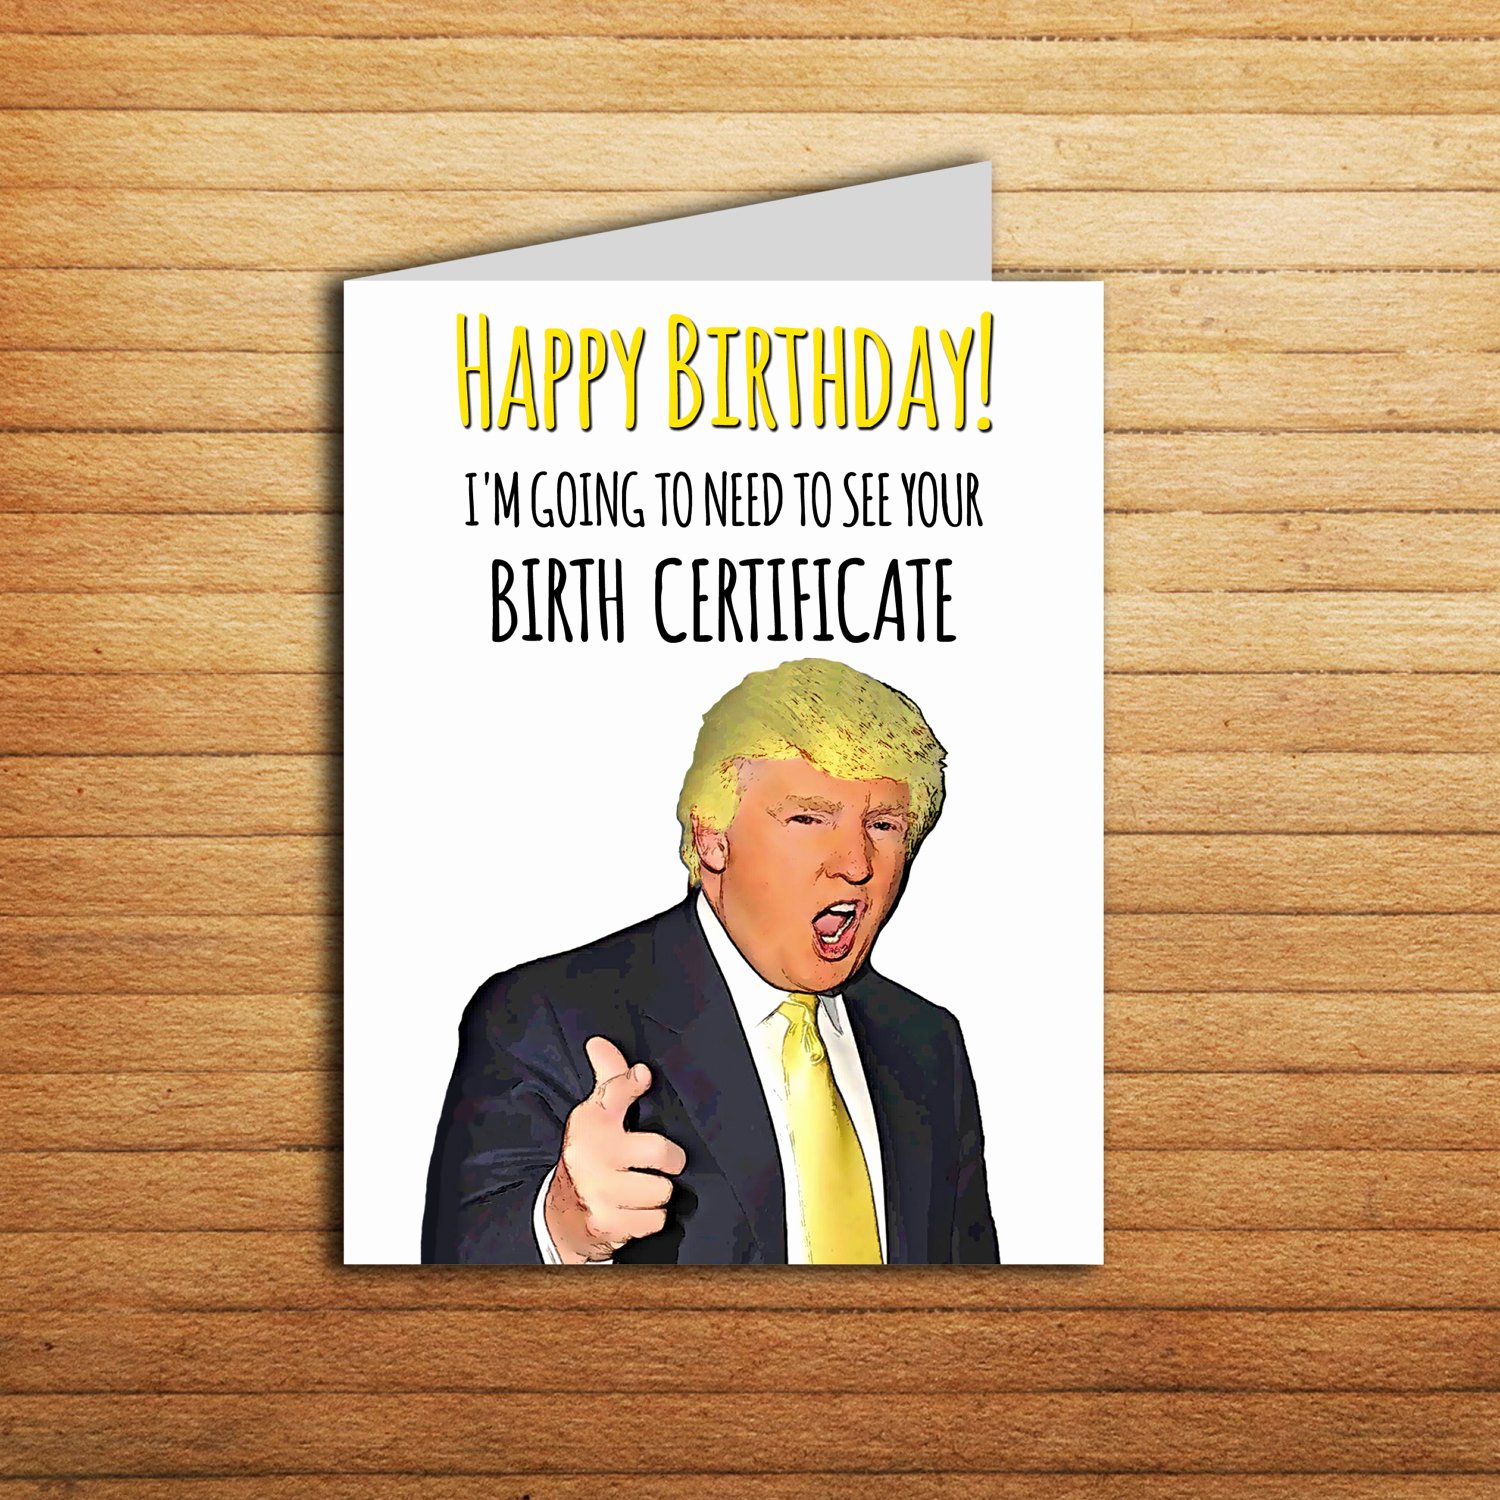 Funny Printable Birthday Cards Lovely Donald Trump Card Birth Certificate Birthday Card Printable